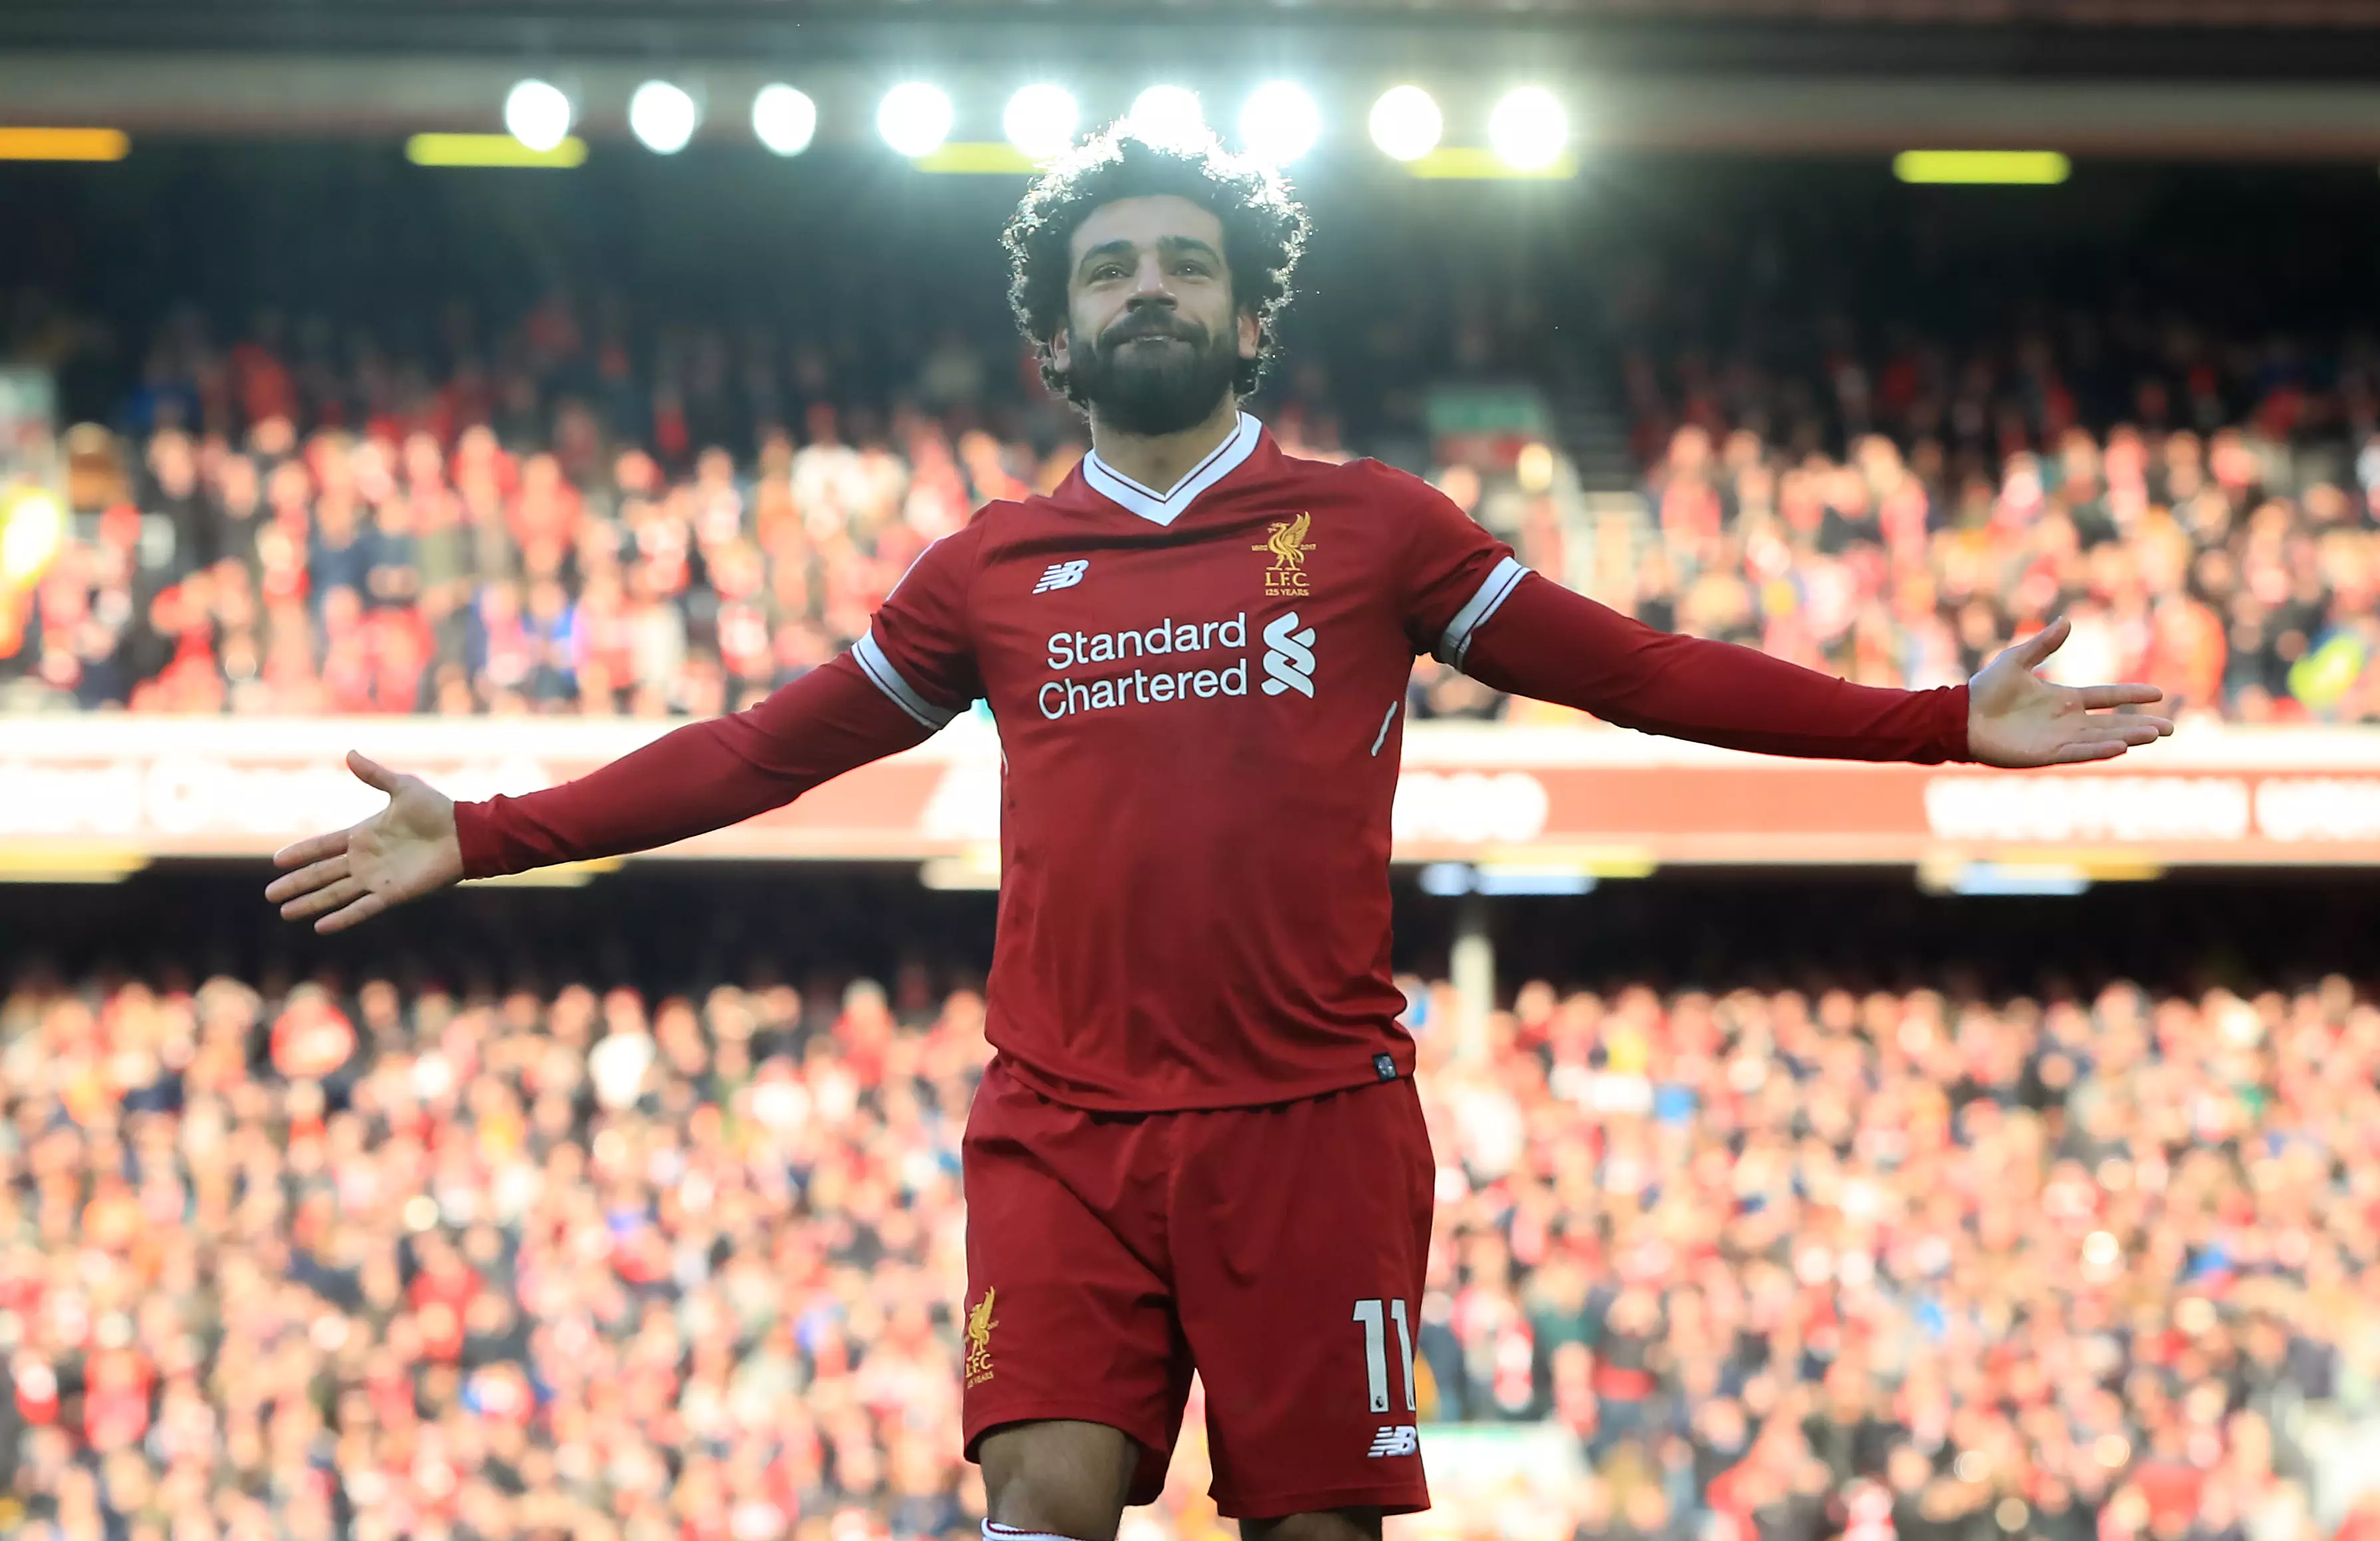 Mo Salah made a stunning impact at Anfield after his £35million move from Roma